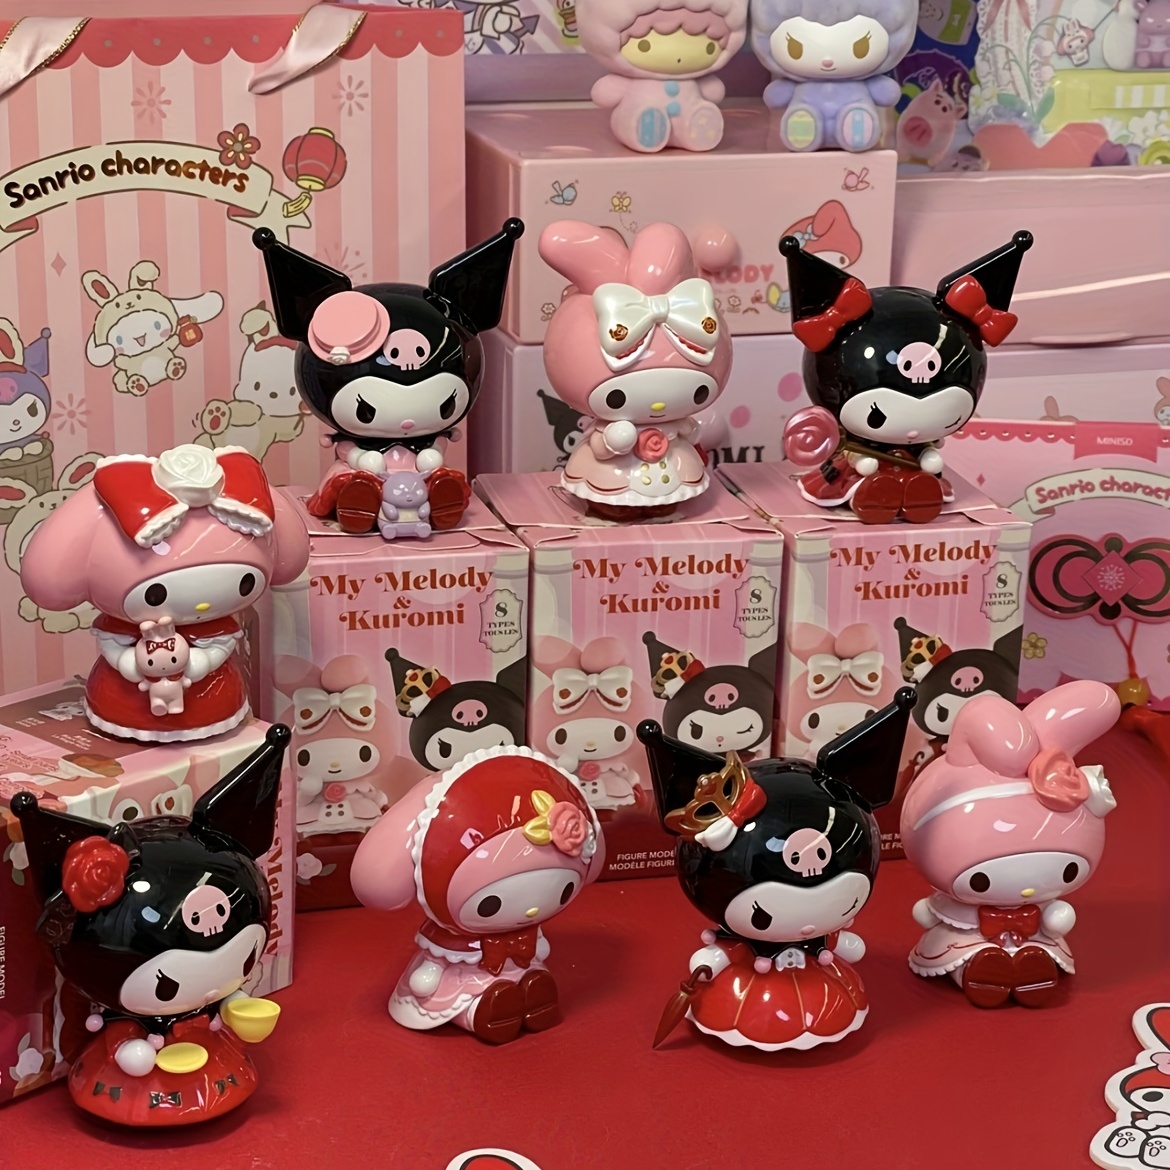 My Melody & Kuromi Rose and Earl Series Blind Box by Sanrio x